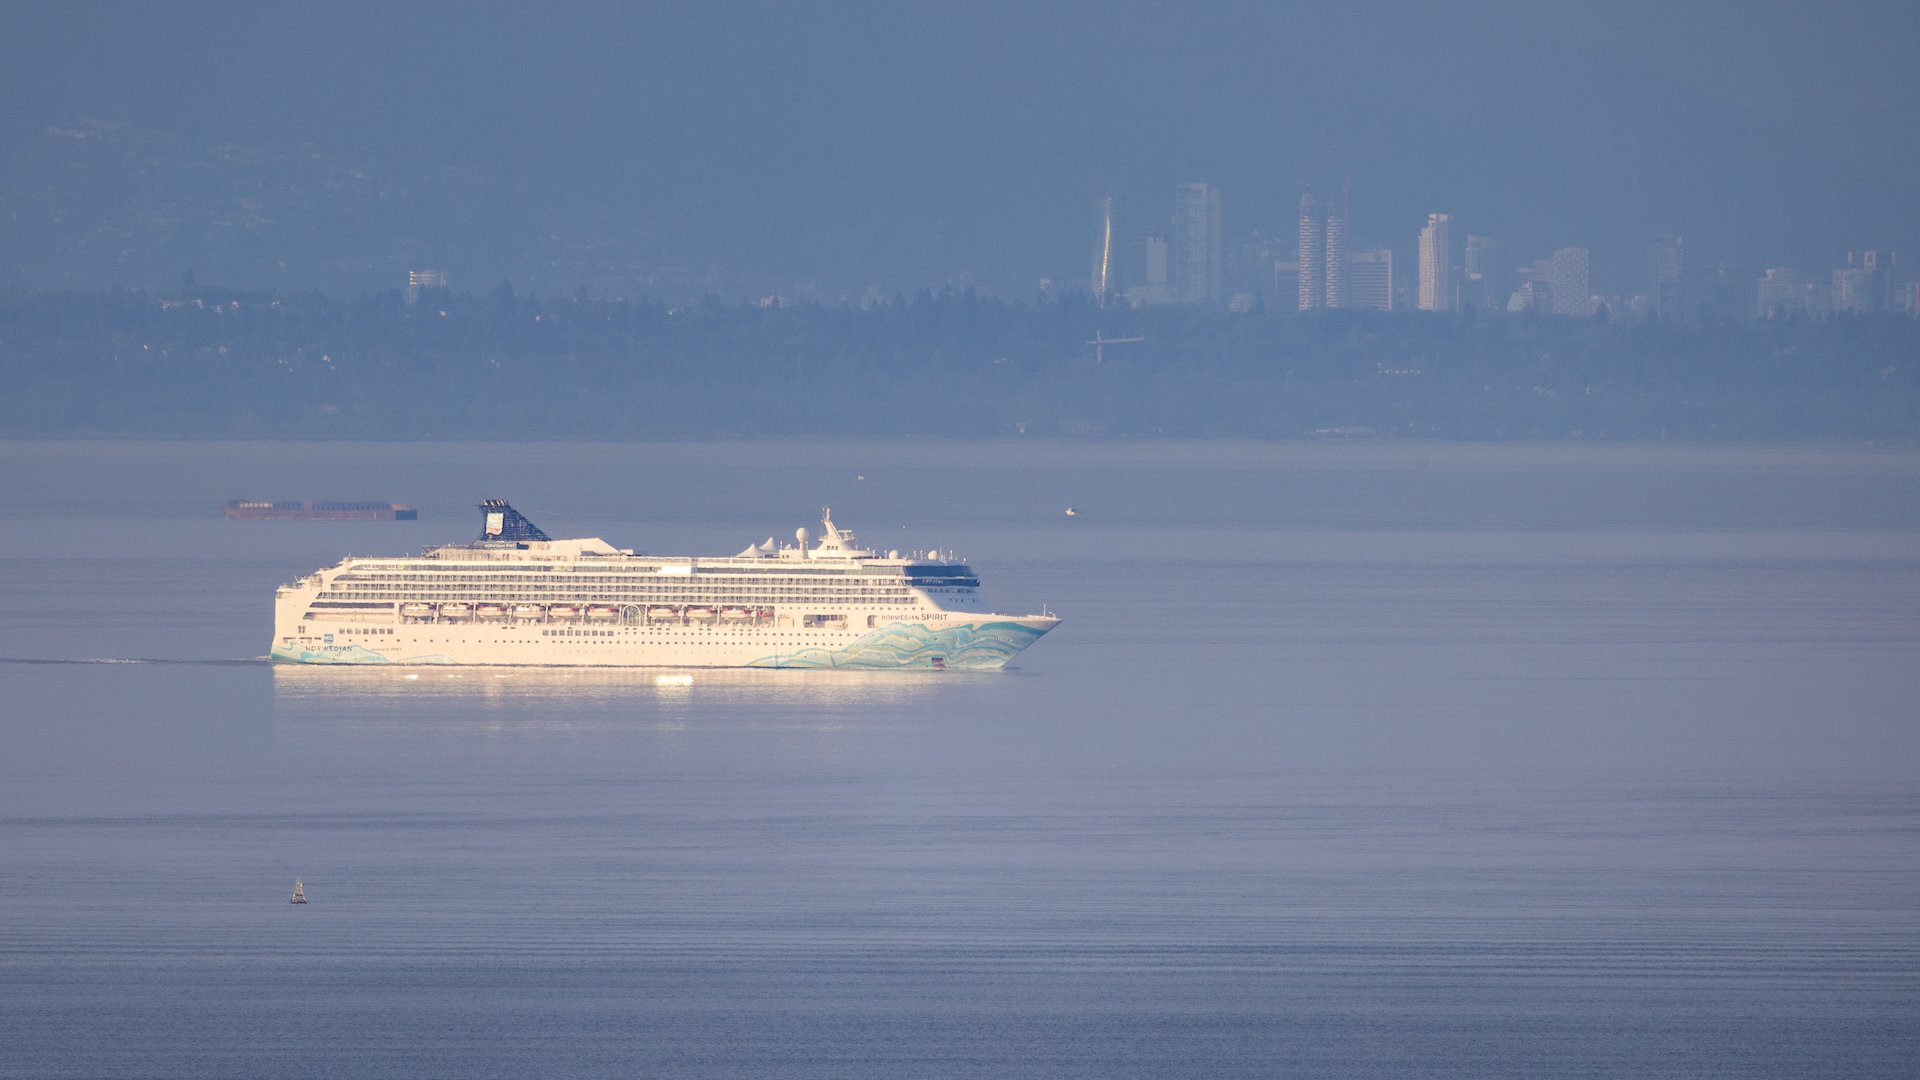  A cruise ship heading out to sea 